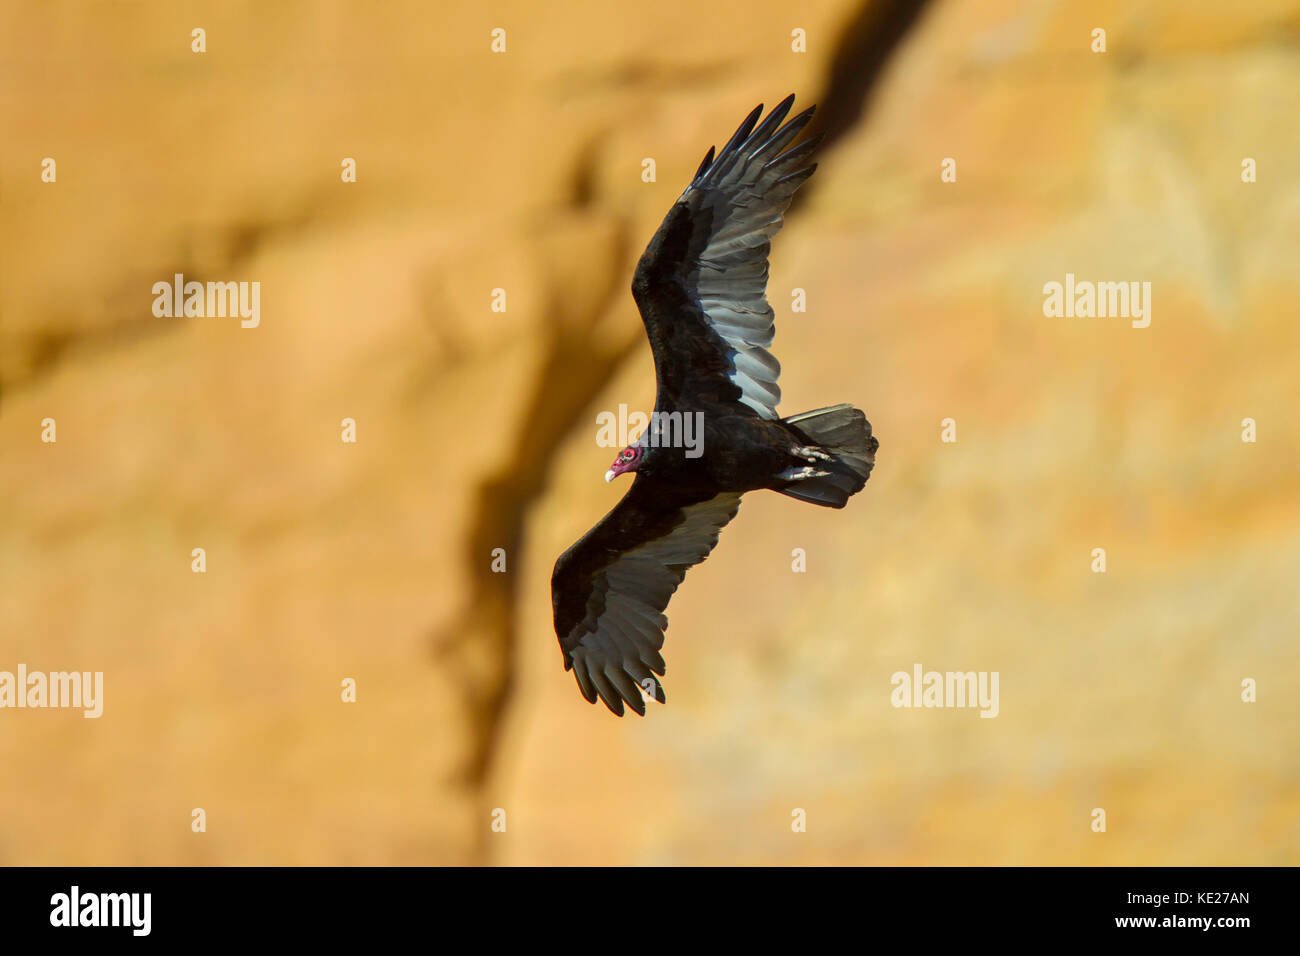 Turkey Vulture  Cathartes aura Chaco Culture National Historic Park, Nageezi, New Mexico, United States 19 September 2017      Adult if flight.        Stock Photo